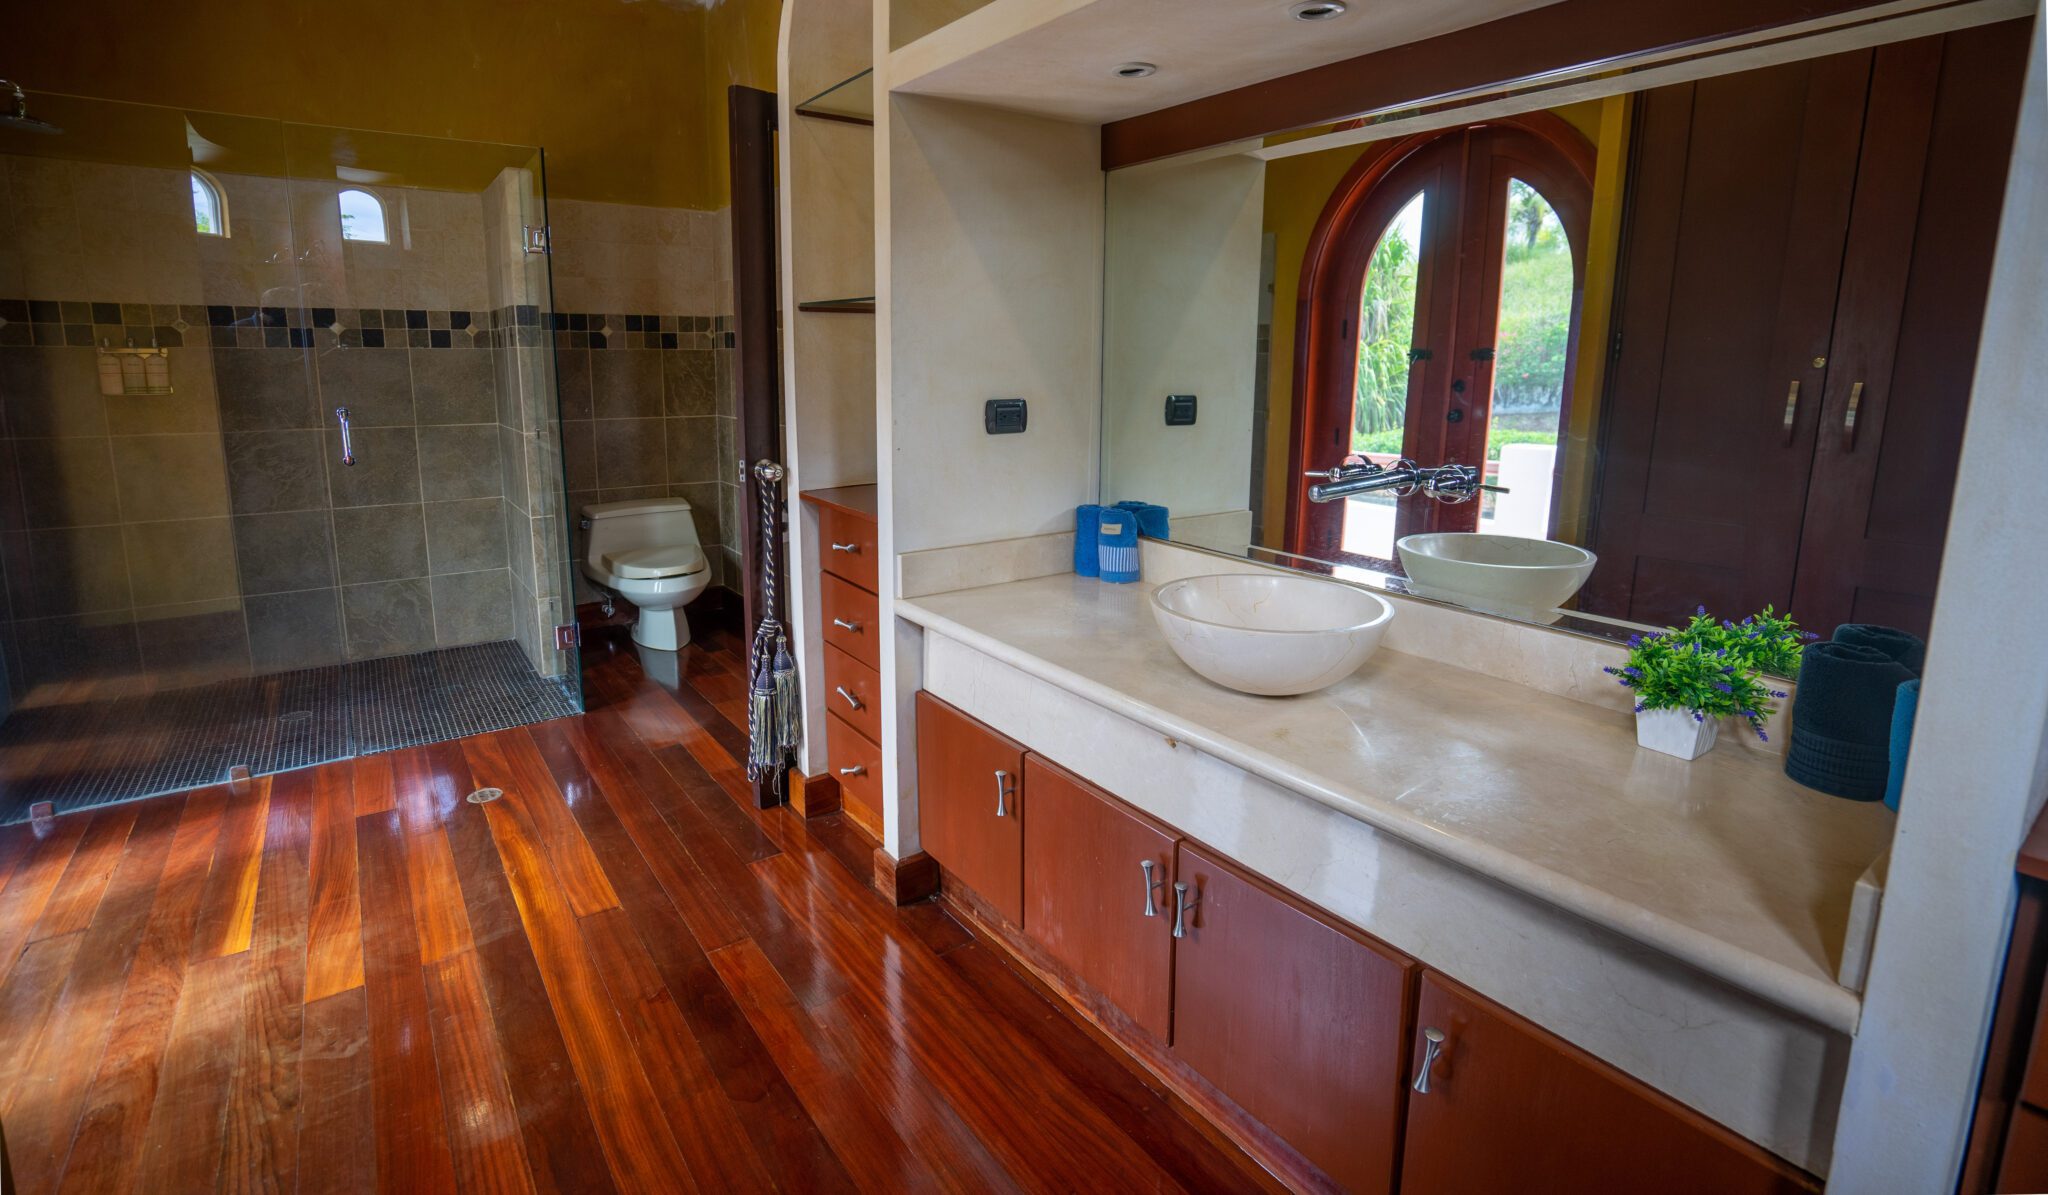 http://view%20of%20the%20bathroom%20from%20a%20Rancho%20Santana%20Property%20for%20Sale%20in%20Nicaragua%20R3